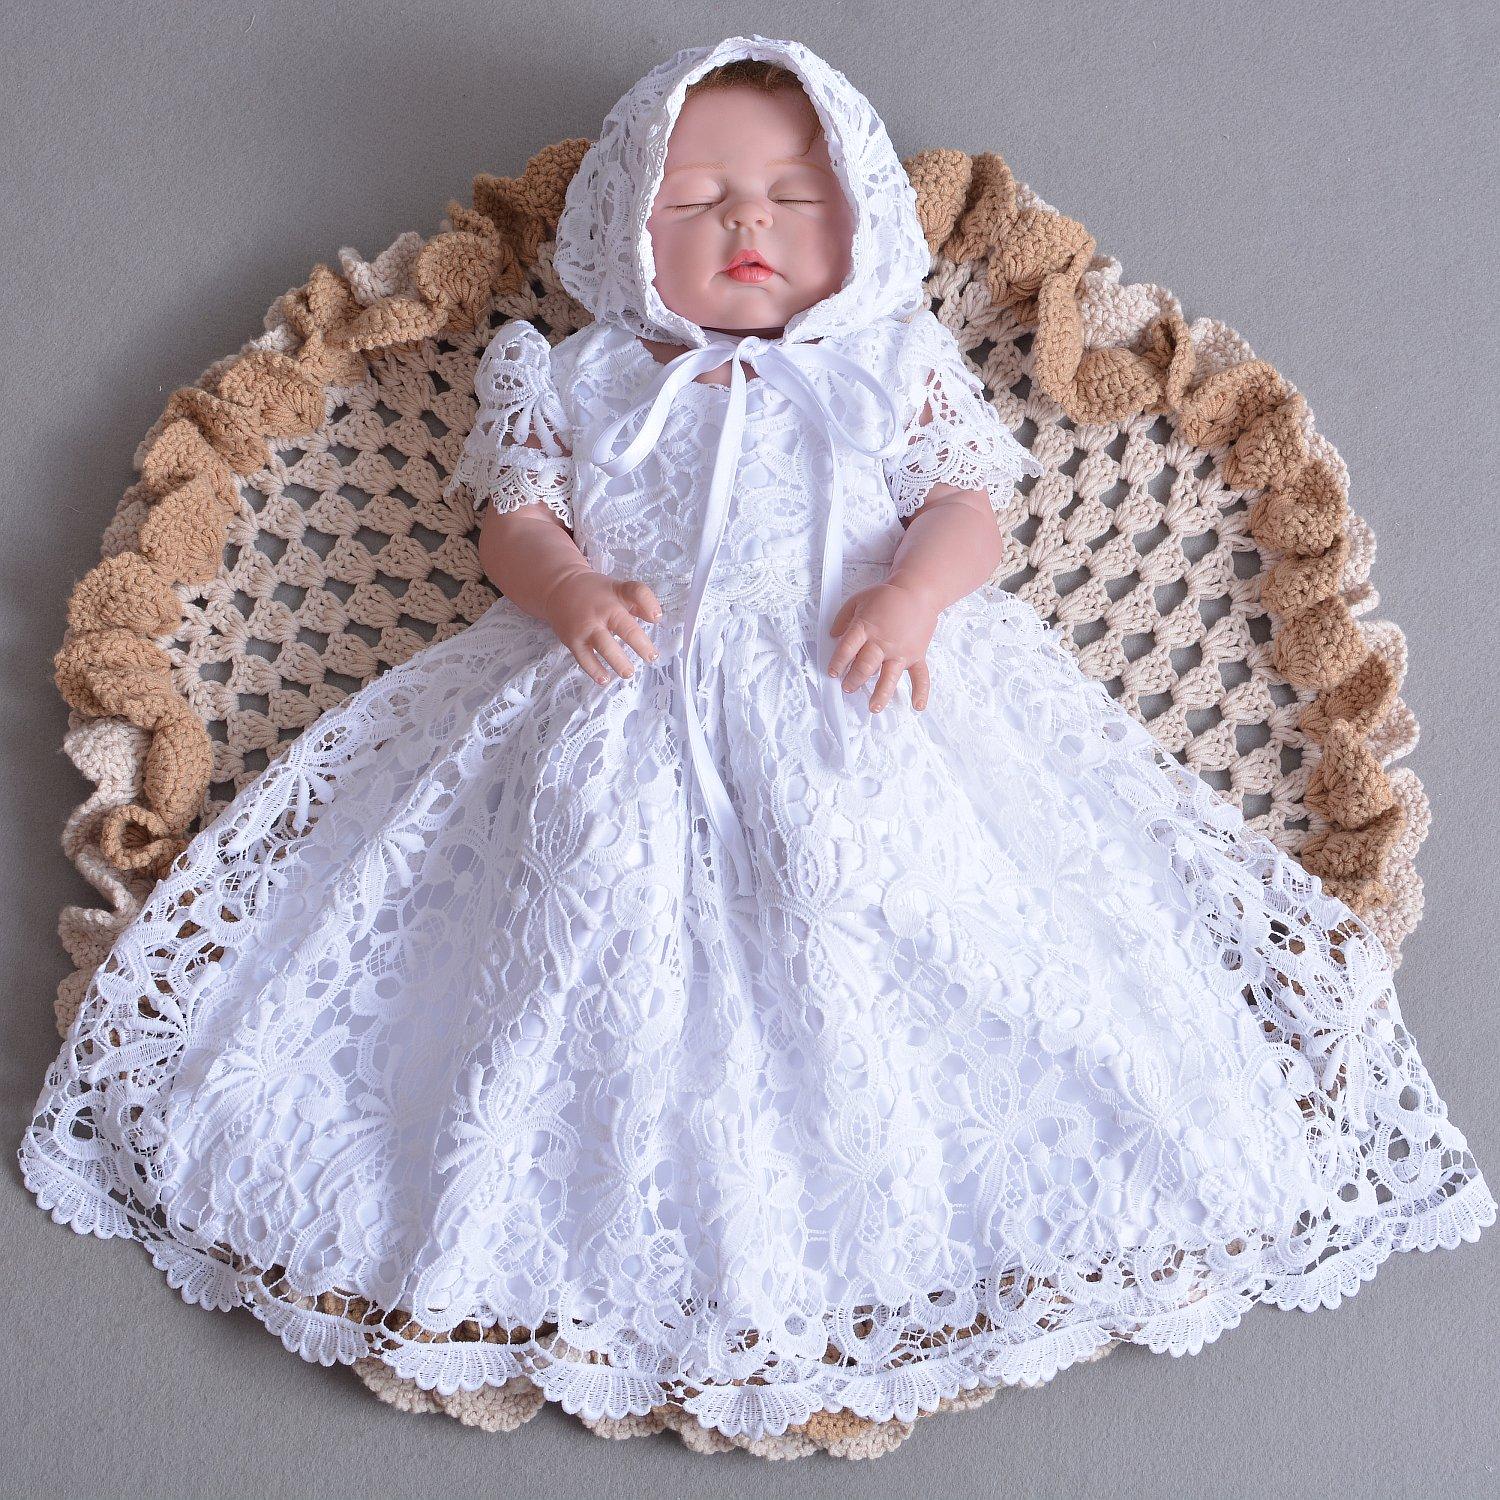 Lace Christening Gown with Bonnet